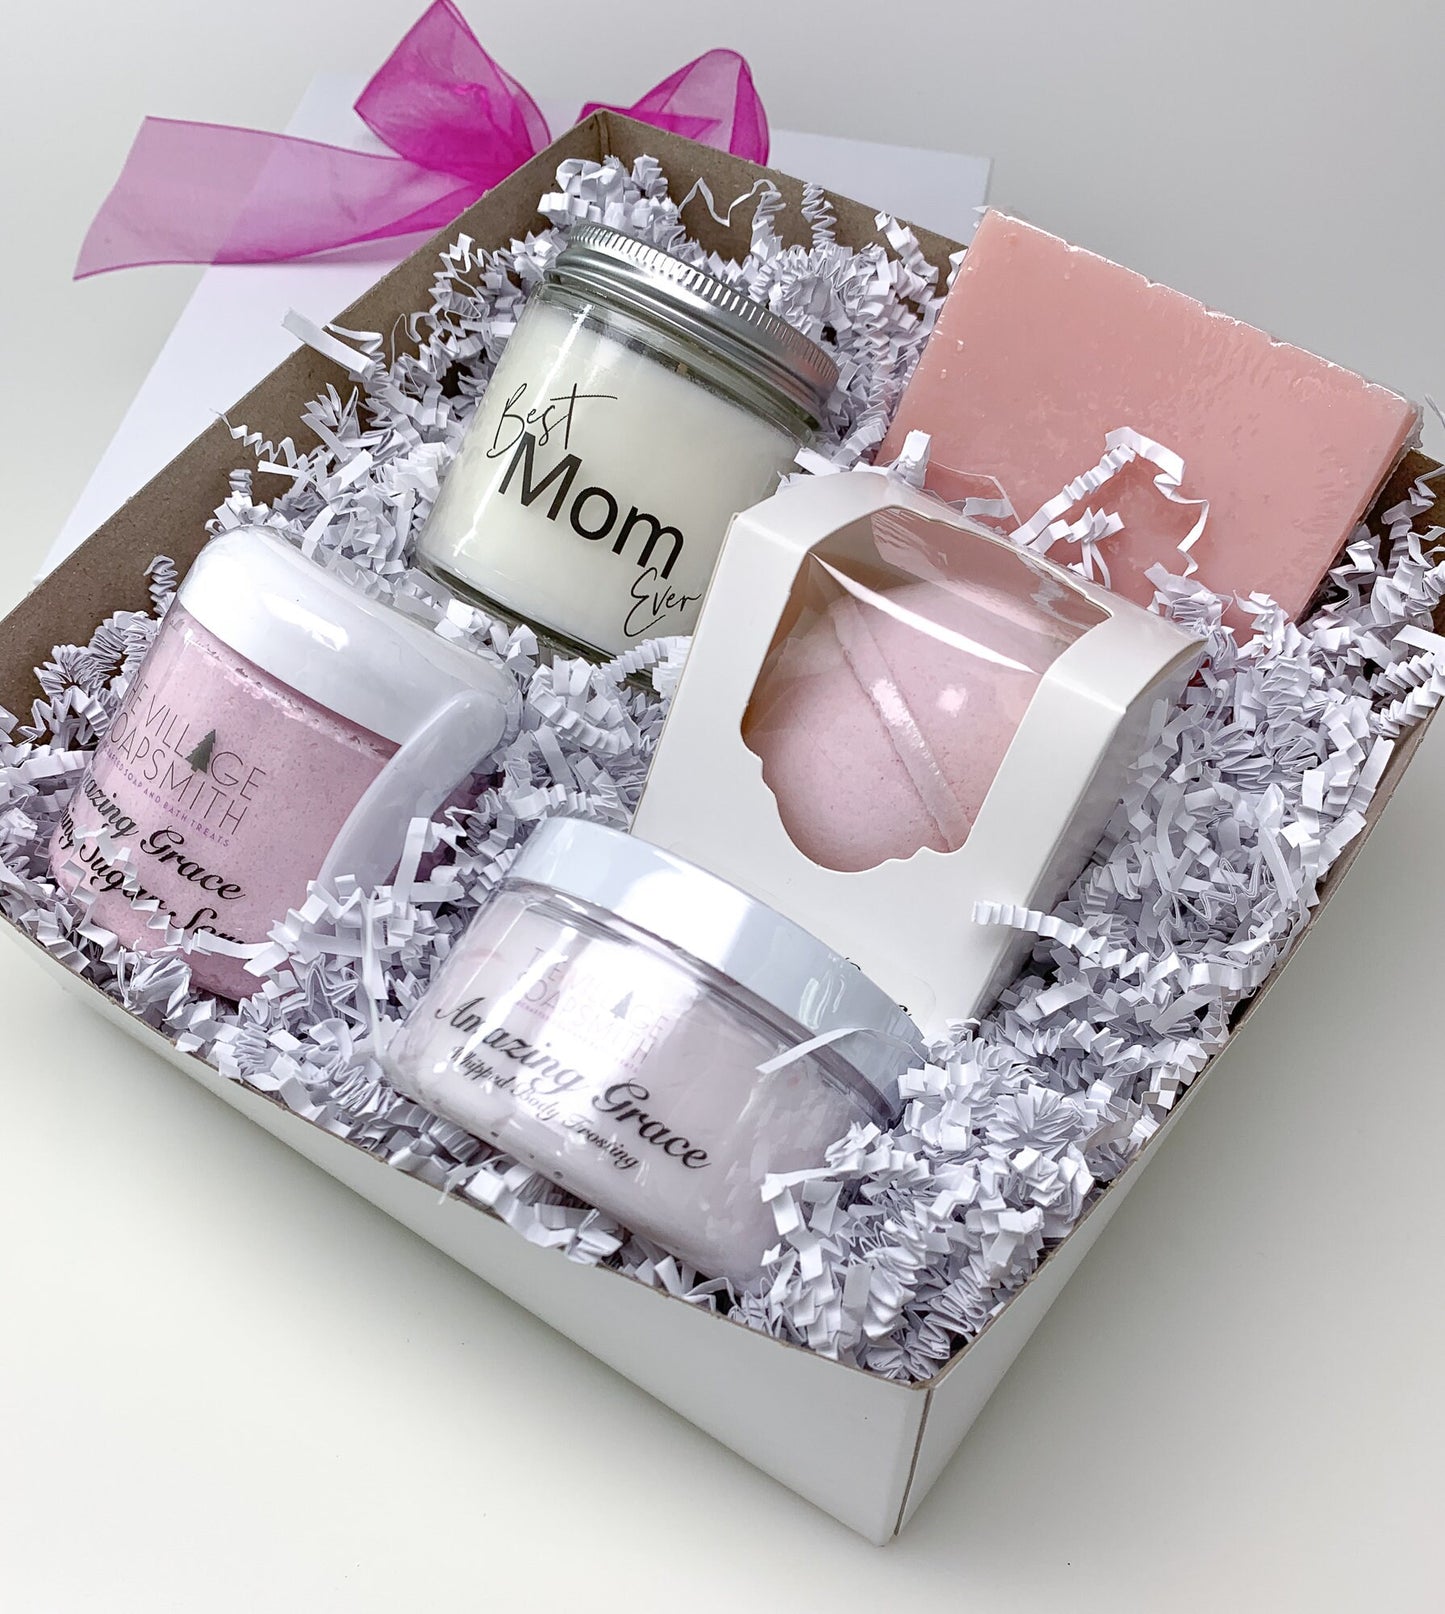 Self-care gift box for Mom | Spa gift set | Gift for her | Mother's Day Gift